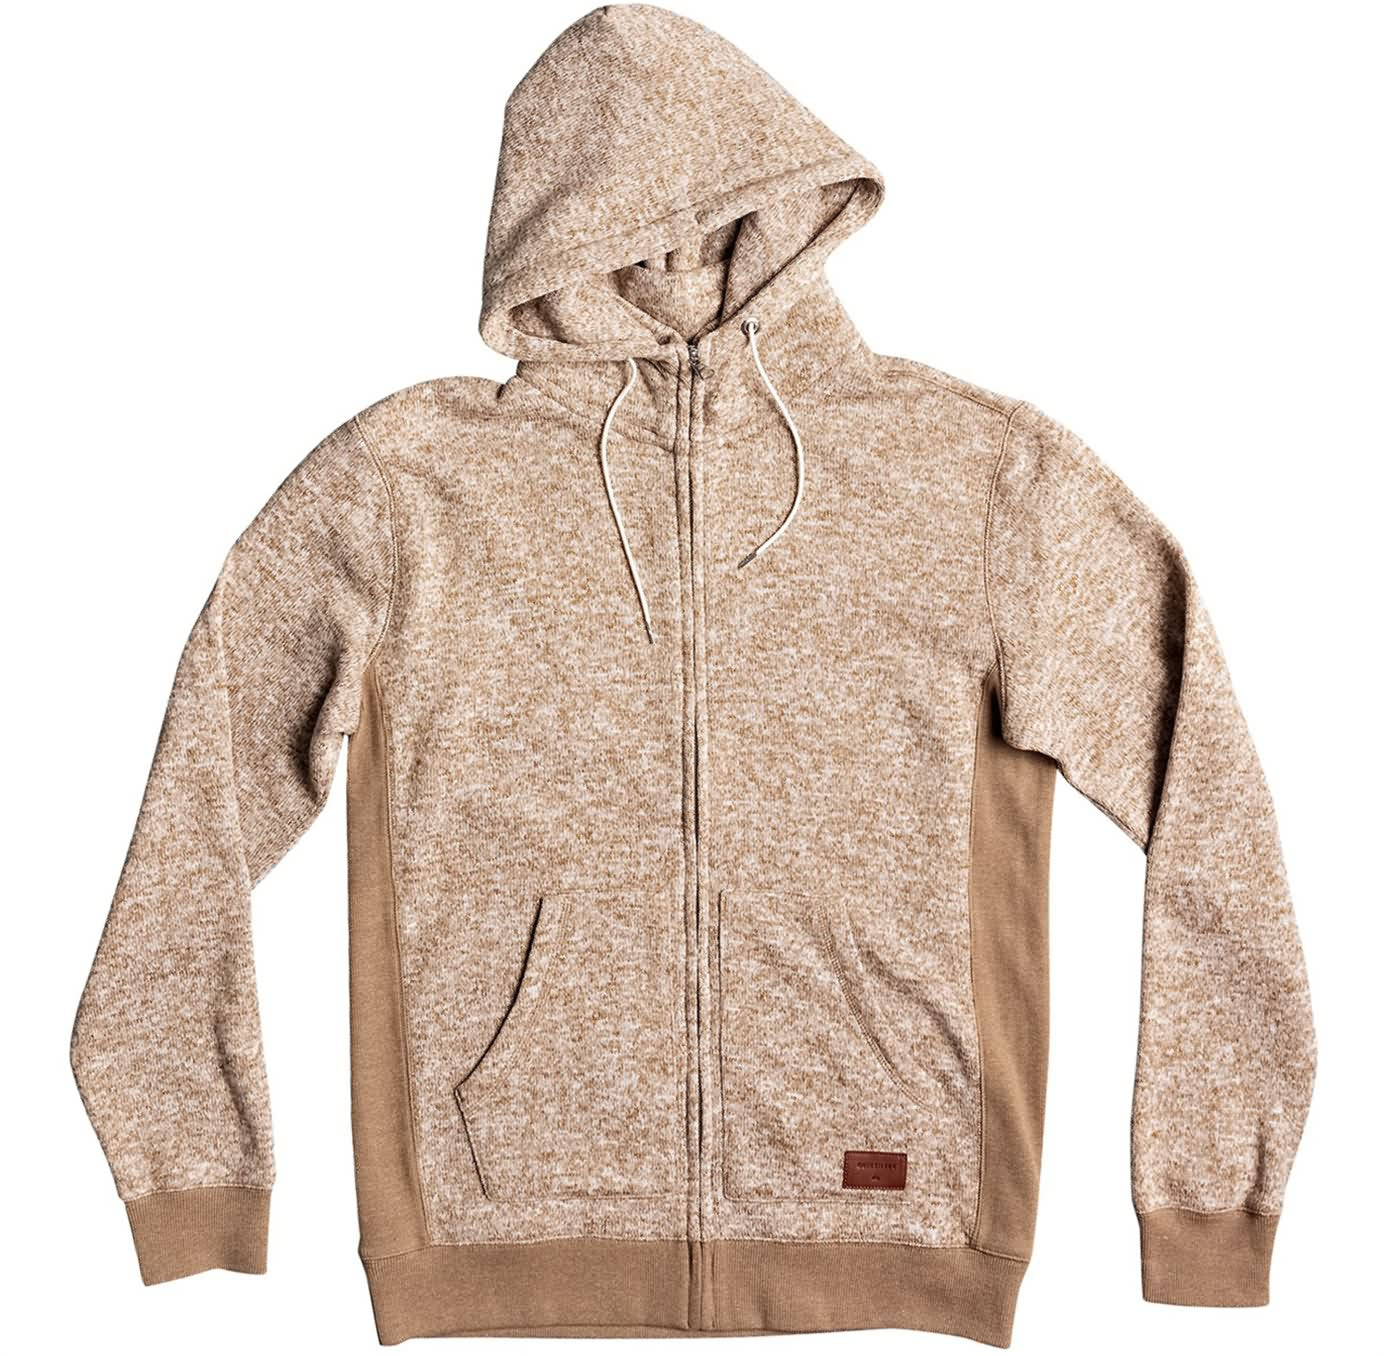 Quiksilver Surf Fall 2017 Mens Lifestyle Hoodies & Sweatshirts Collection